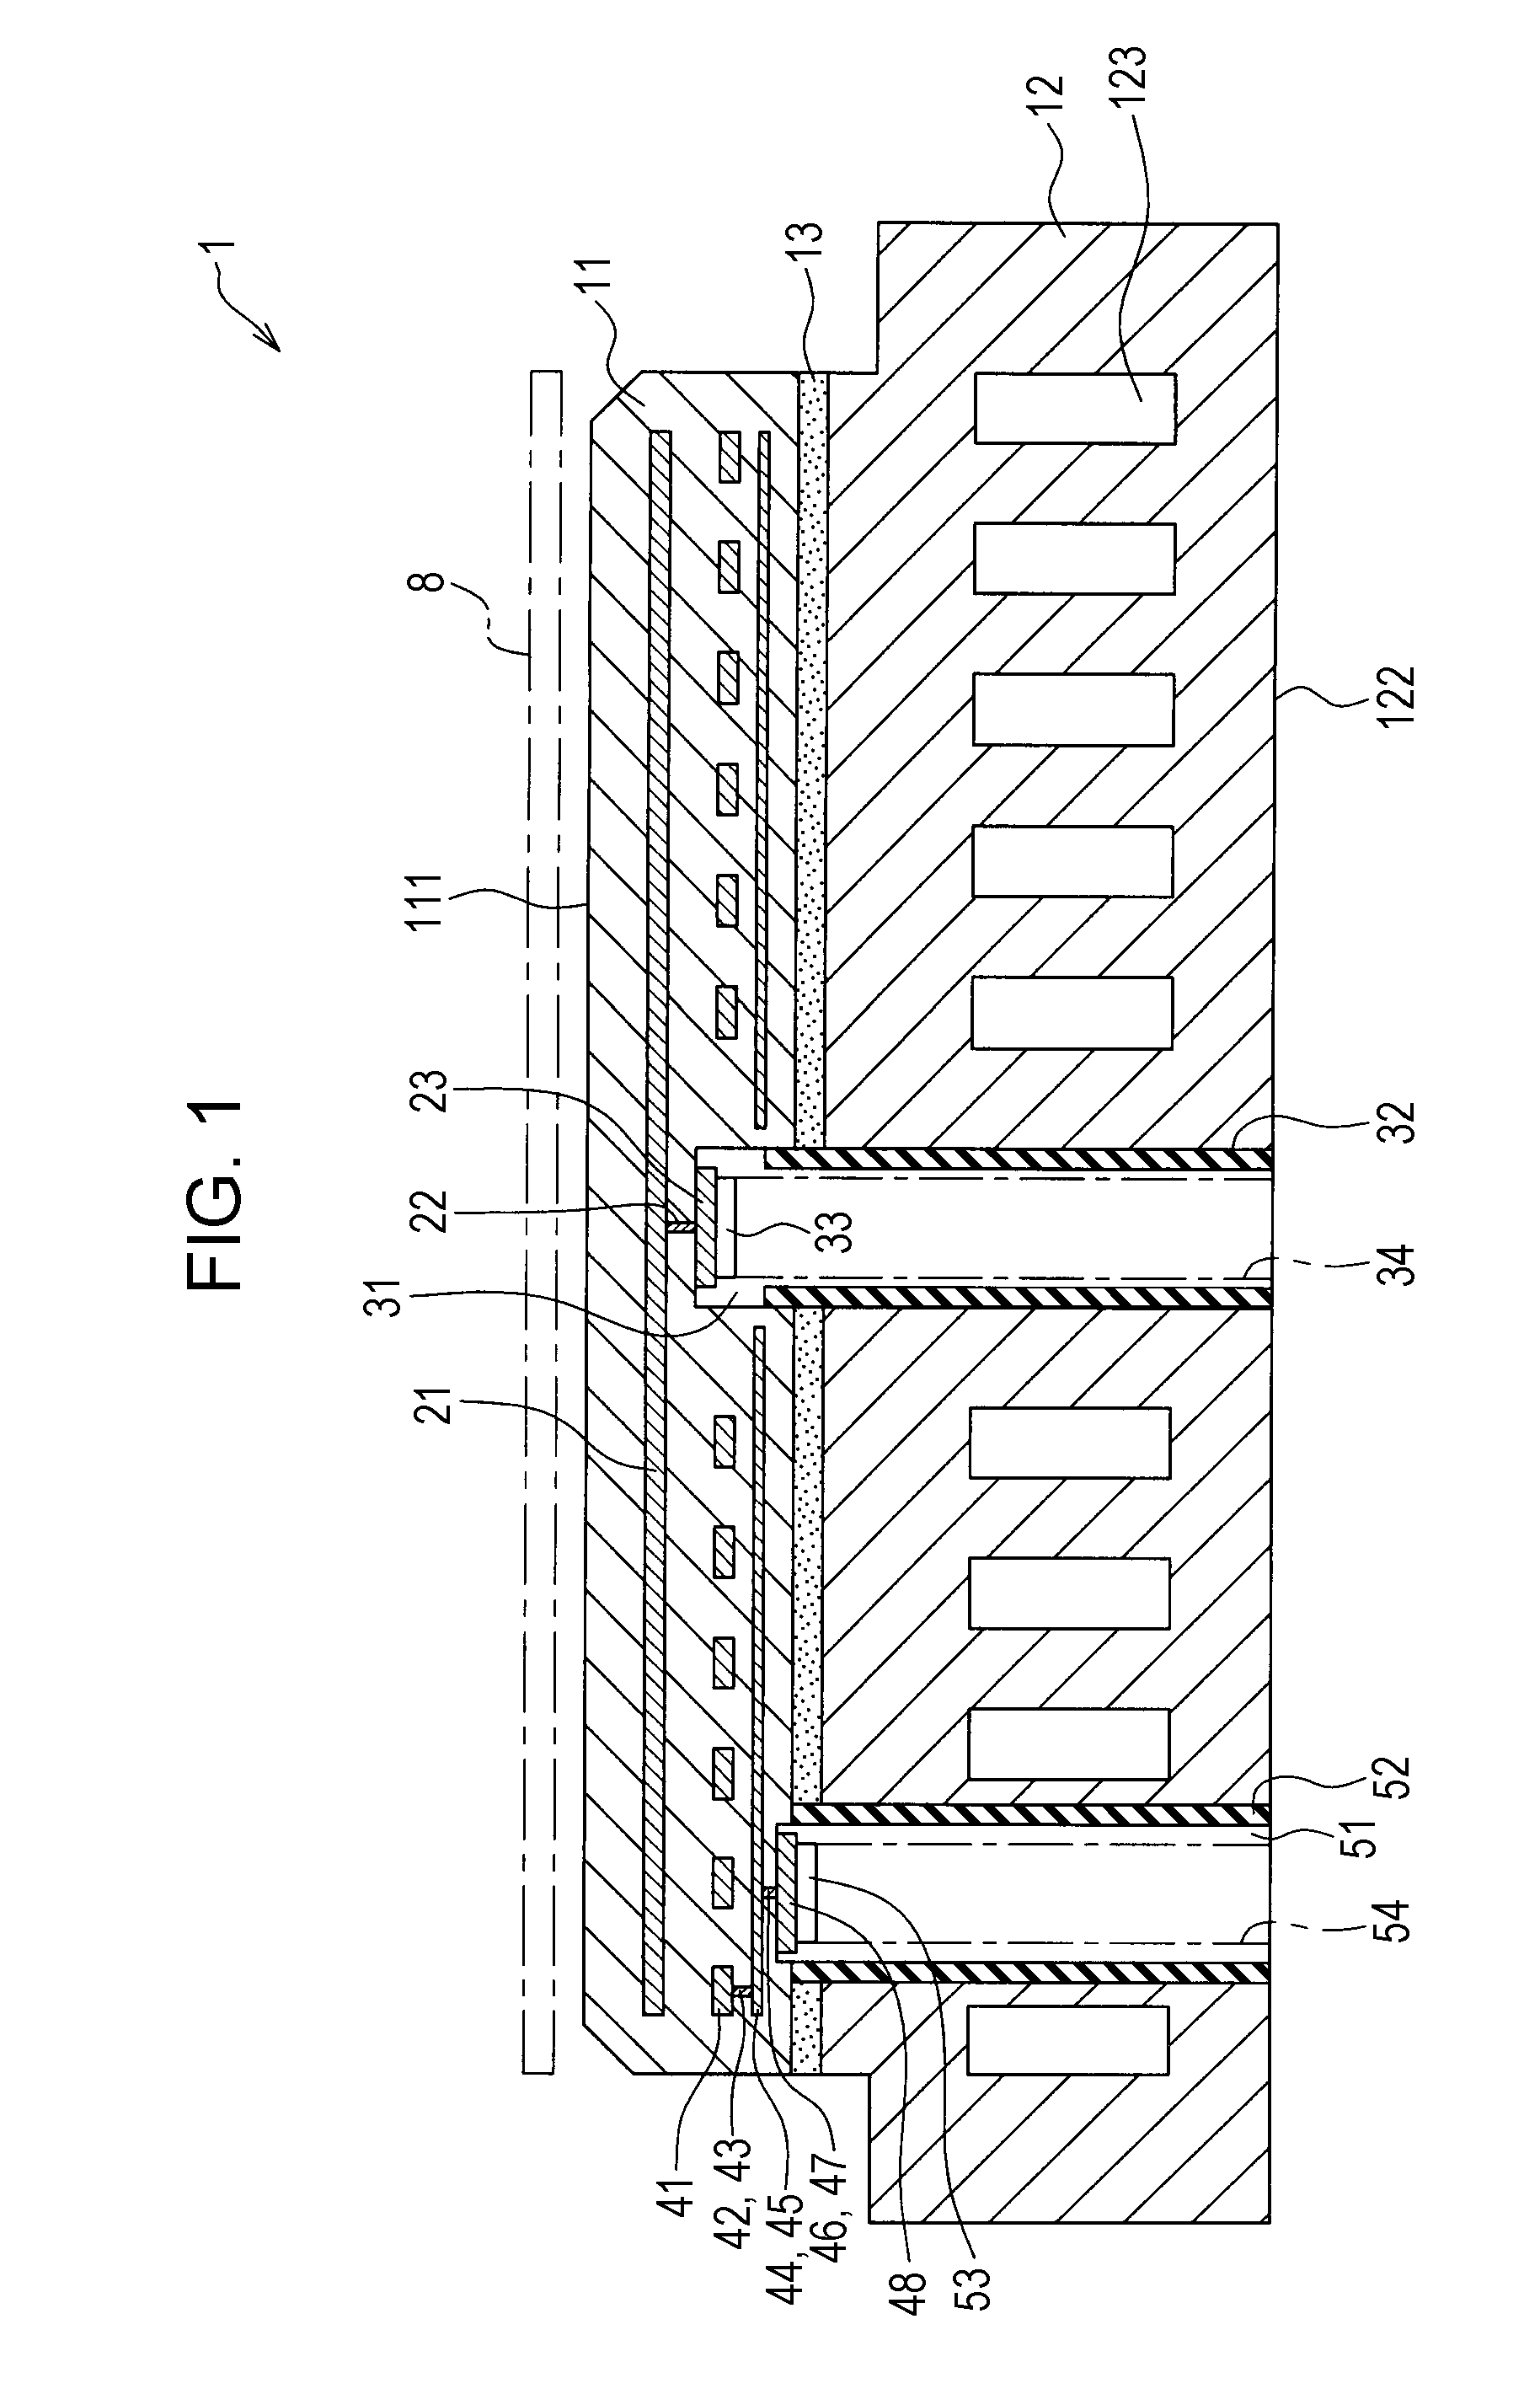 Semiconductor manufacturing equipment component and method of making the same